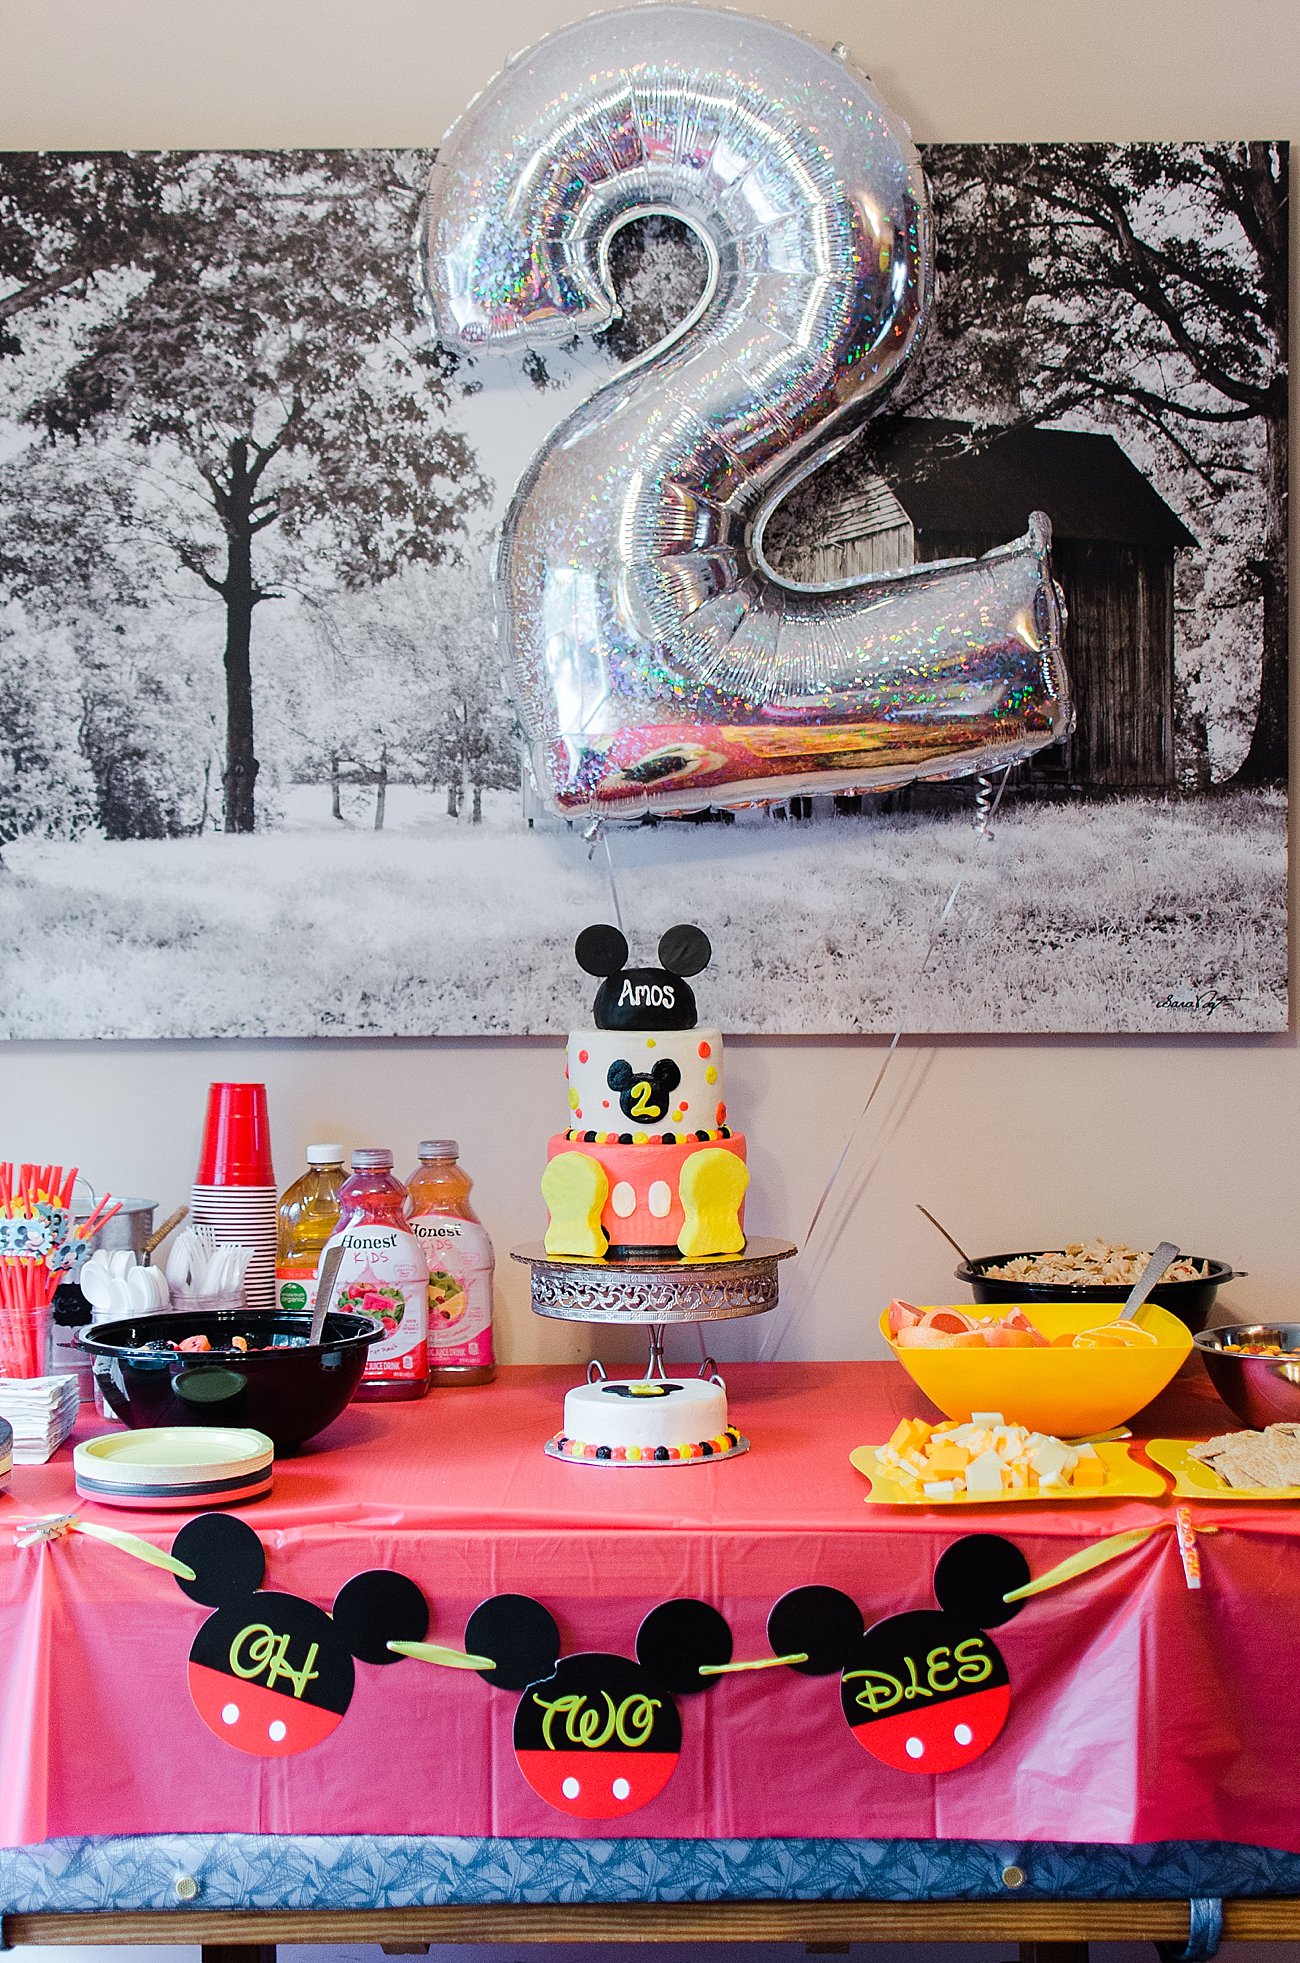 Amos's Mickey Mouse "Oh Two-dles" Birthday Party (3) - Mickey Mouse Birthday Party by popular North Carolina lifestyle blogger Still Being Molly